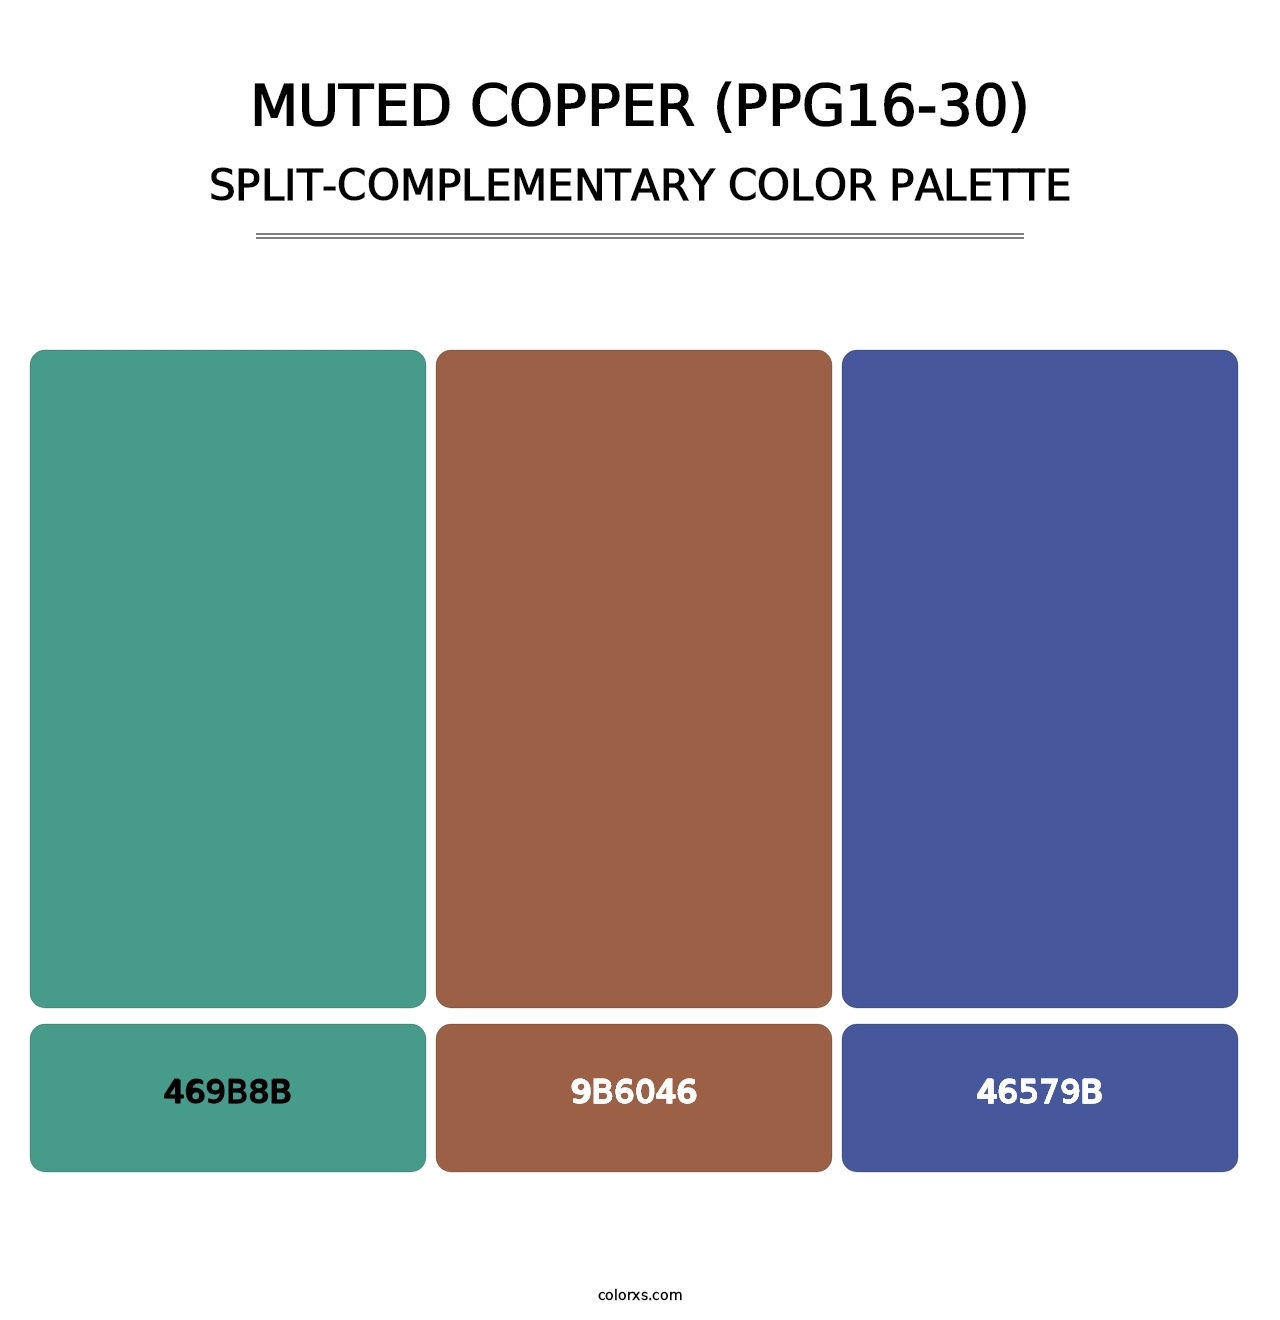 Muted Copper (PPG16-30) - Split-Complementary Color Palette